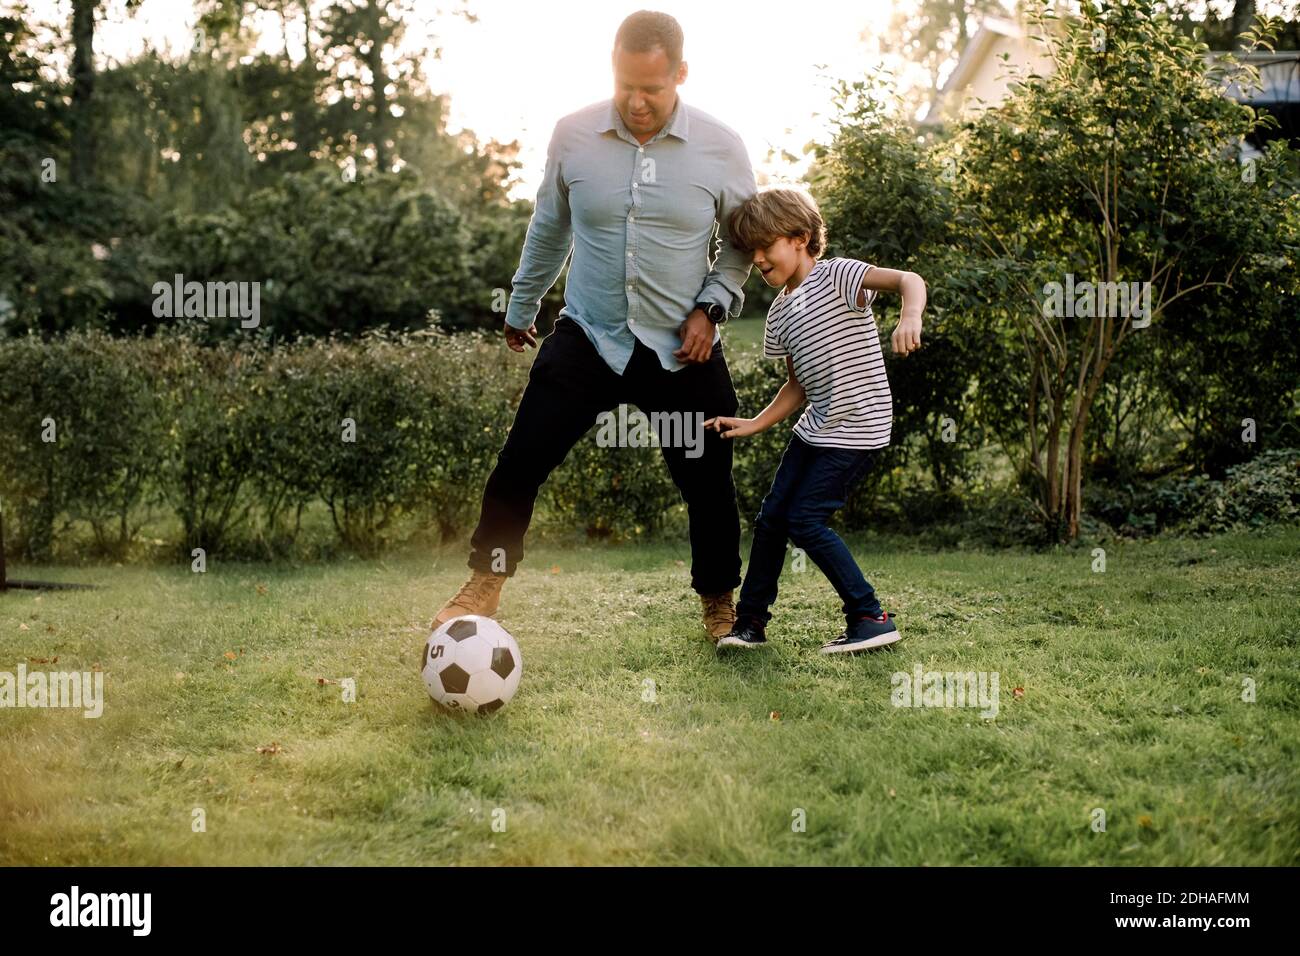 Full length of father and son playing soccer in backyard during weekend activities Stock Photo